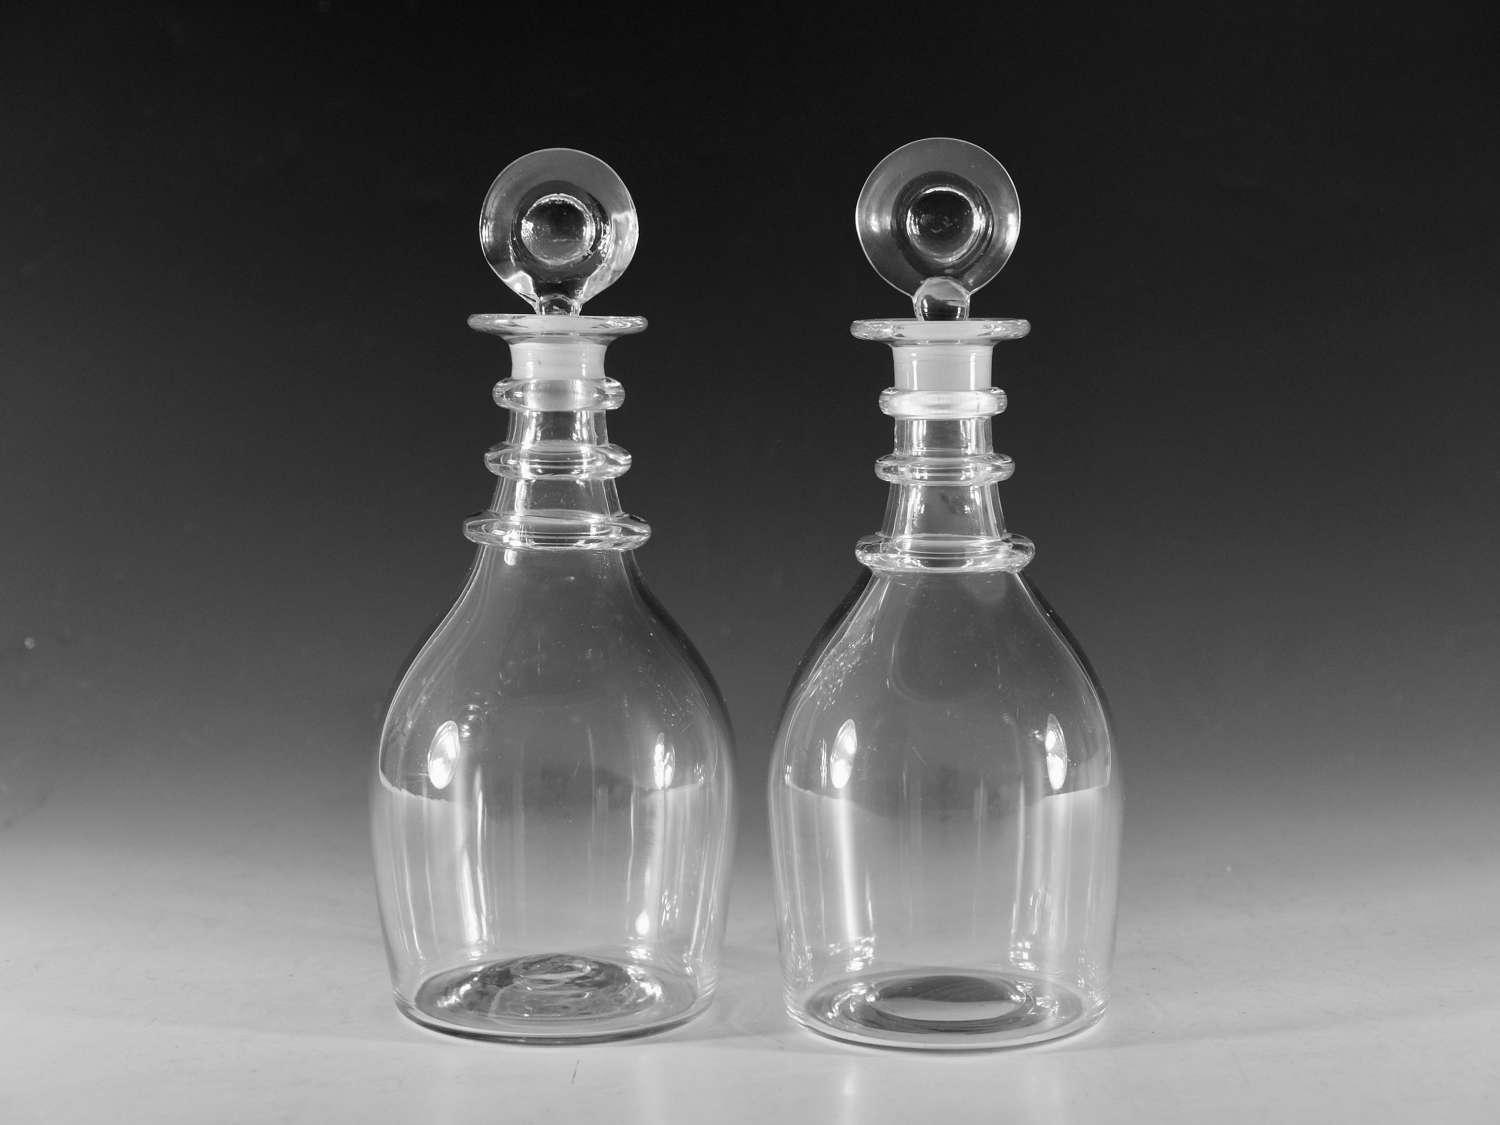 Antique glass - near pair of decanters English c1820